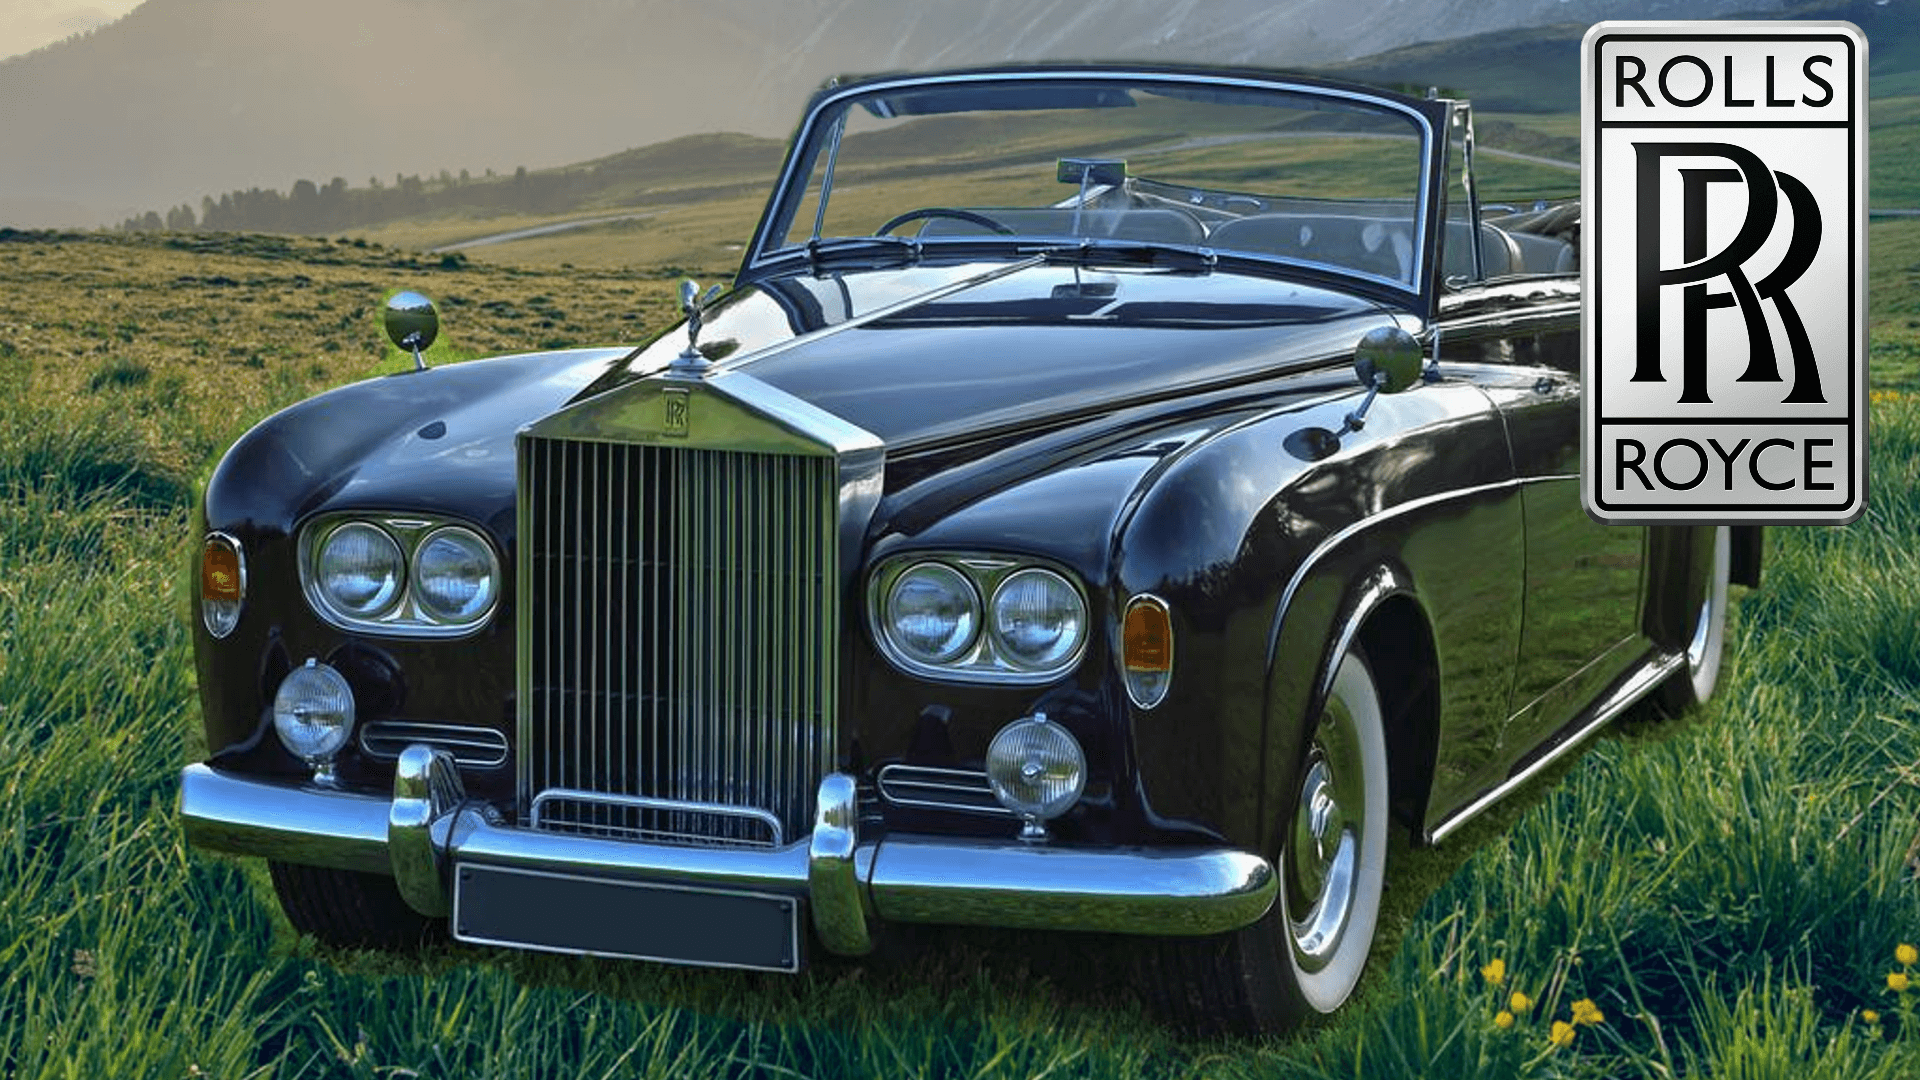 Every Rolls Royce From 1904 To Present Day – Part 3 of 4 (Post-War)